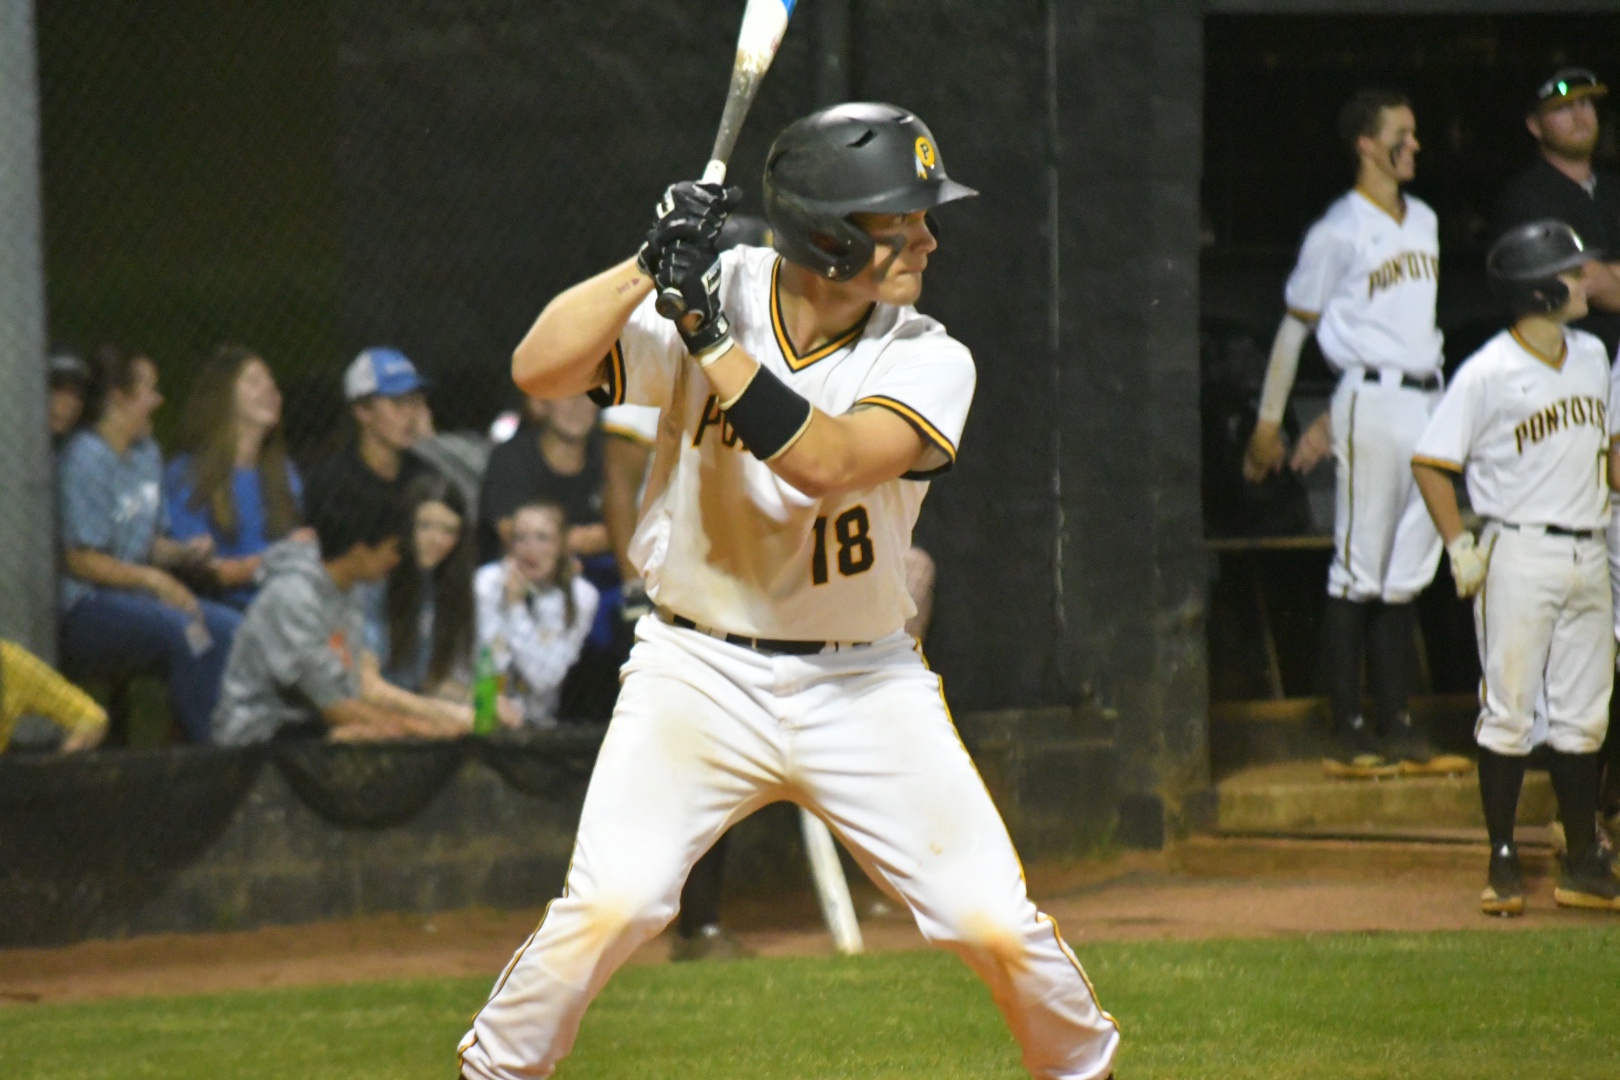 Harris, Hobson and Townsend make All State baseball team